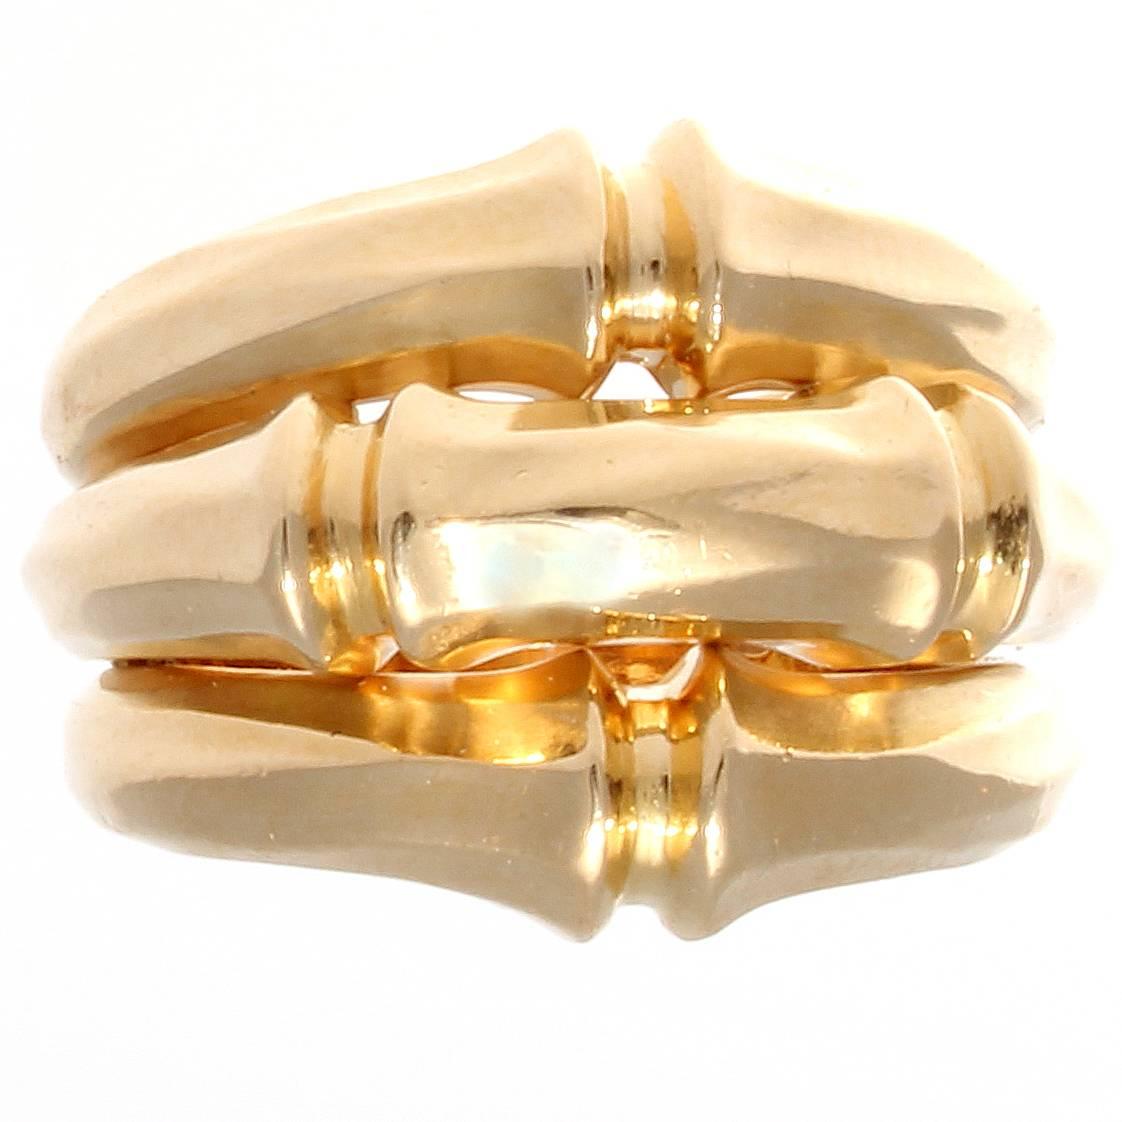 Cartier, elegant and timeless. Designed with 3 rows of sleek textured 18k yellow gold. Signed Cartier and numbered.

Ring size 7.